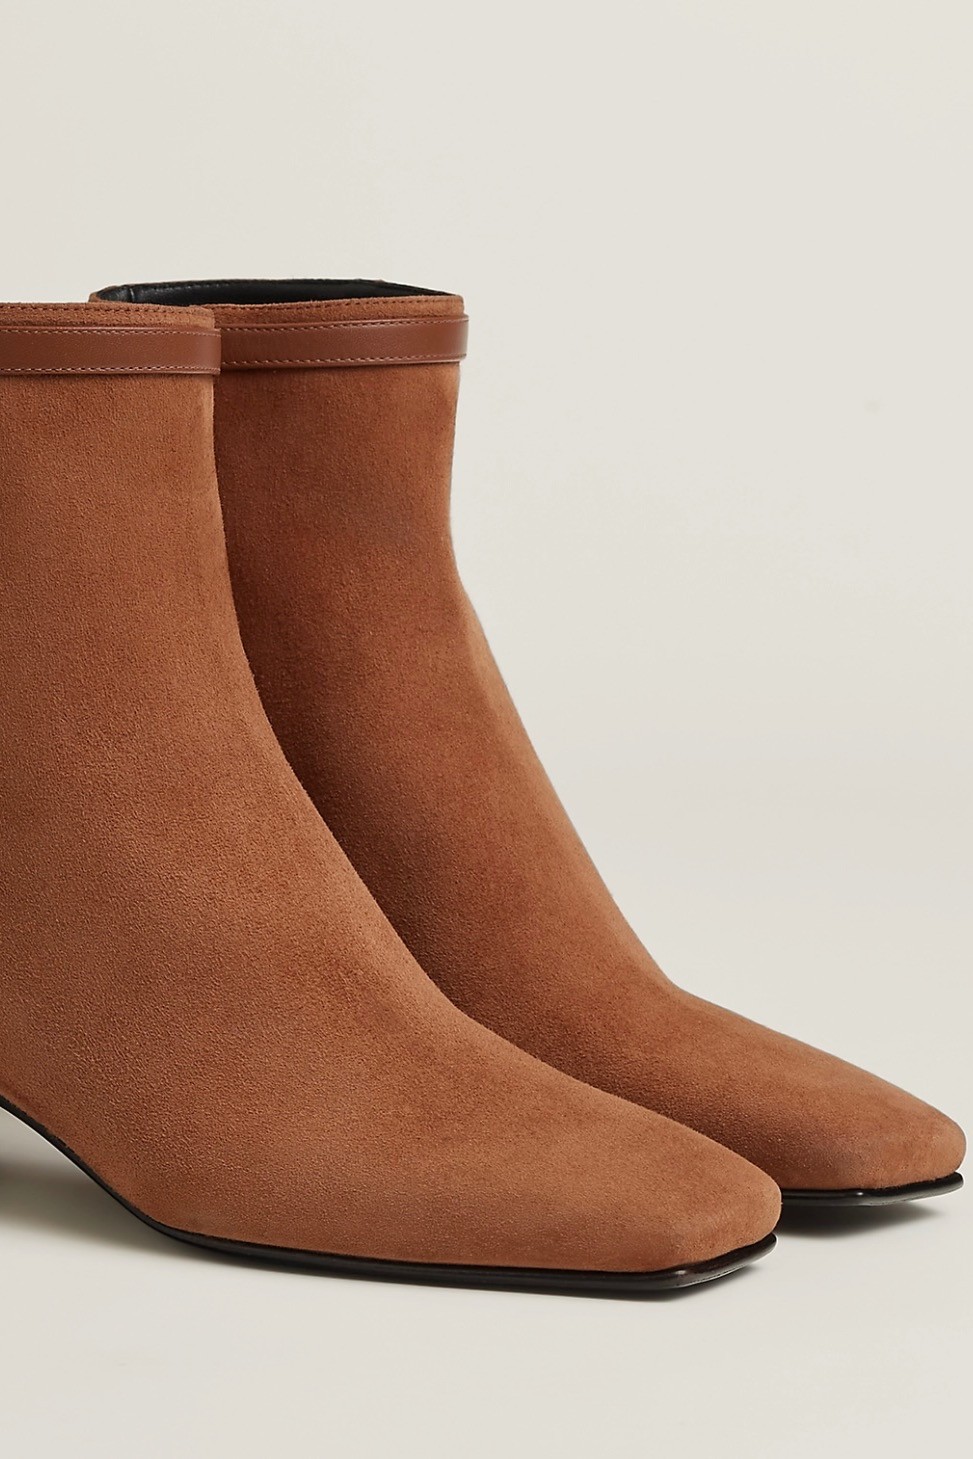 Hermès - Hommage ankle boot